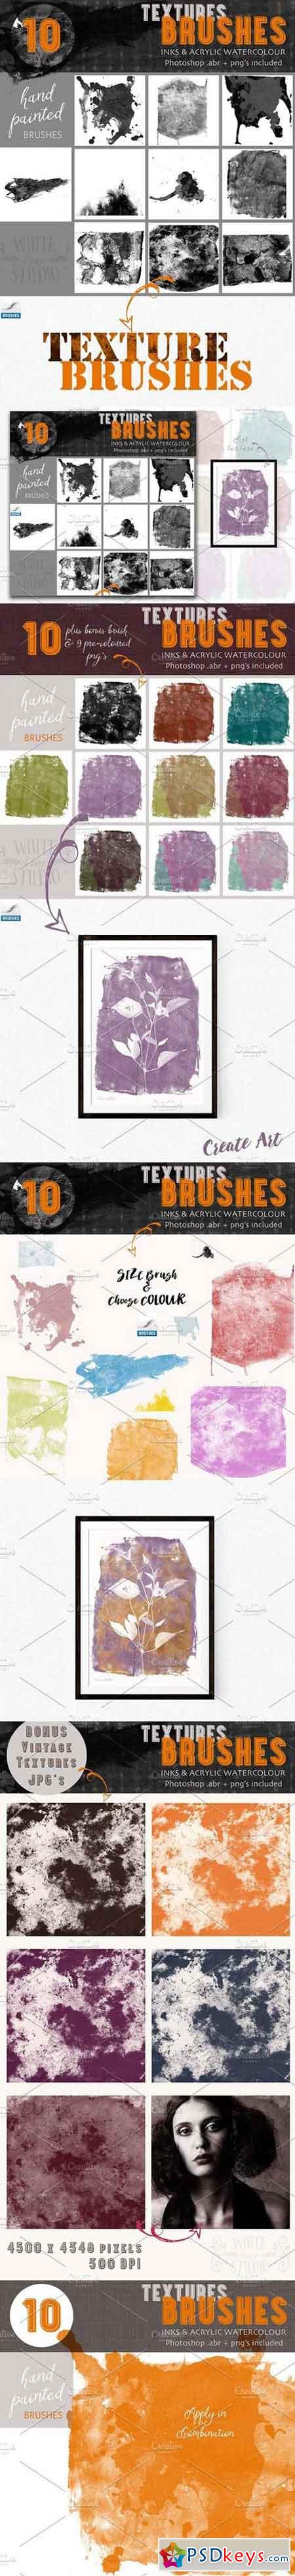 Textures Brushes- Inks & Acrylics 1596098